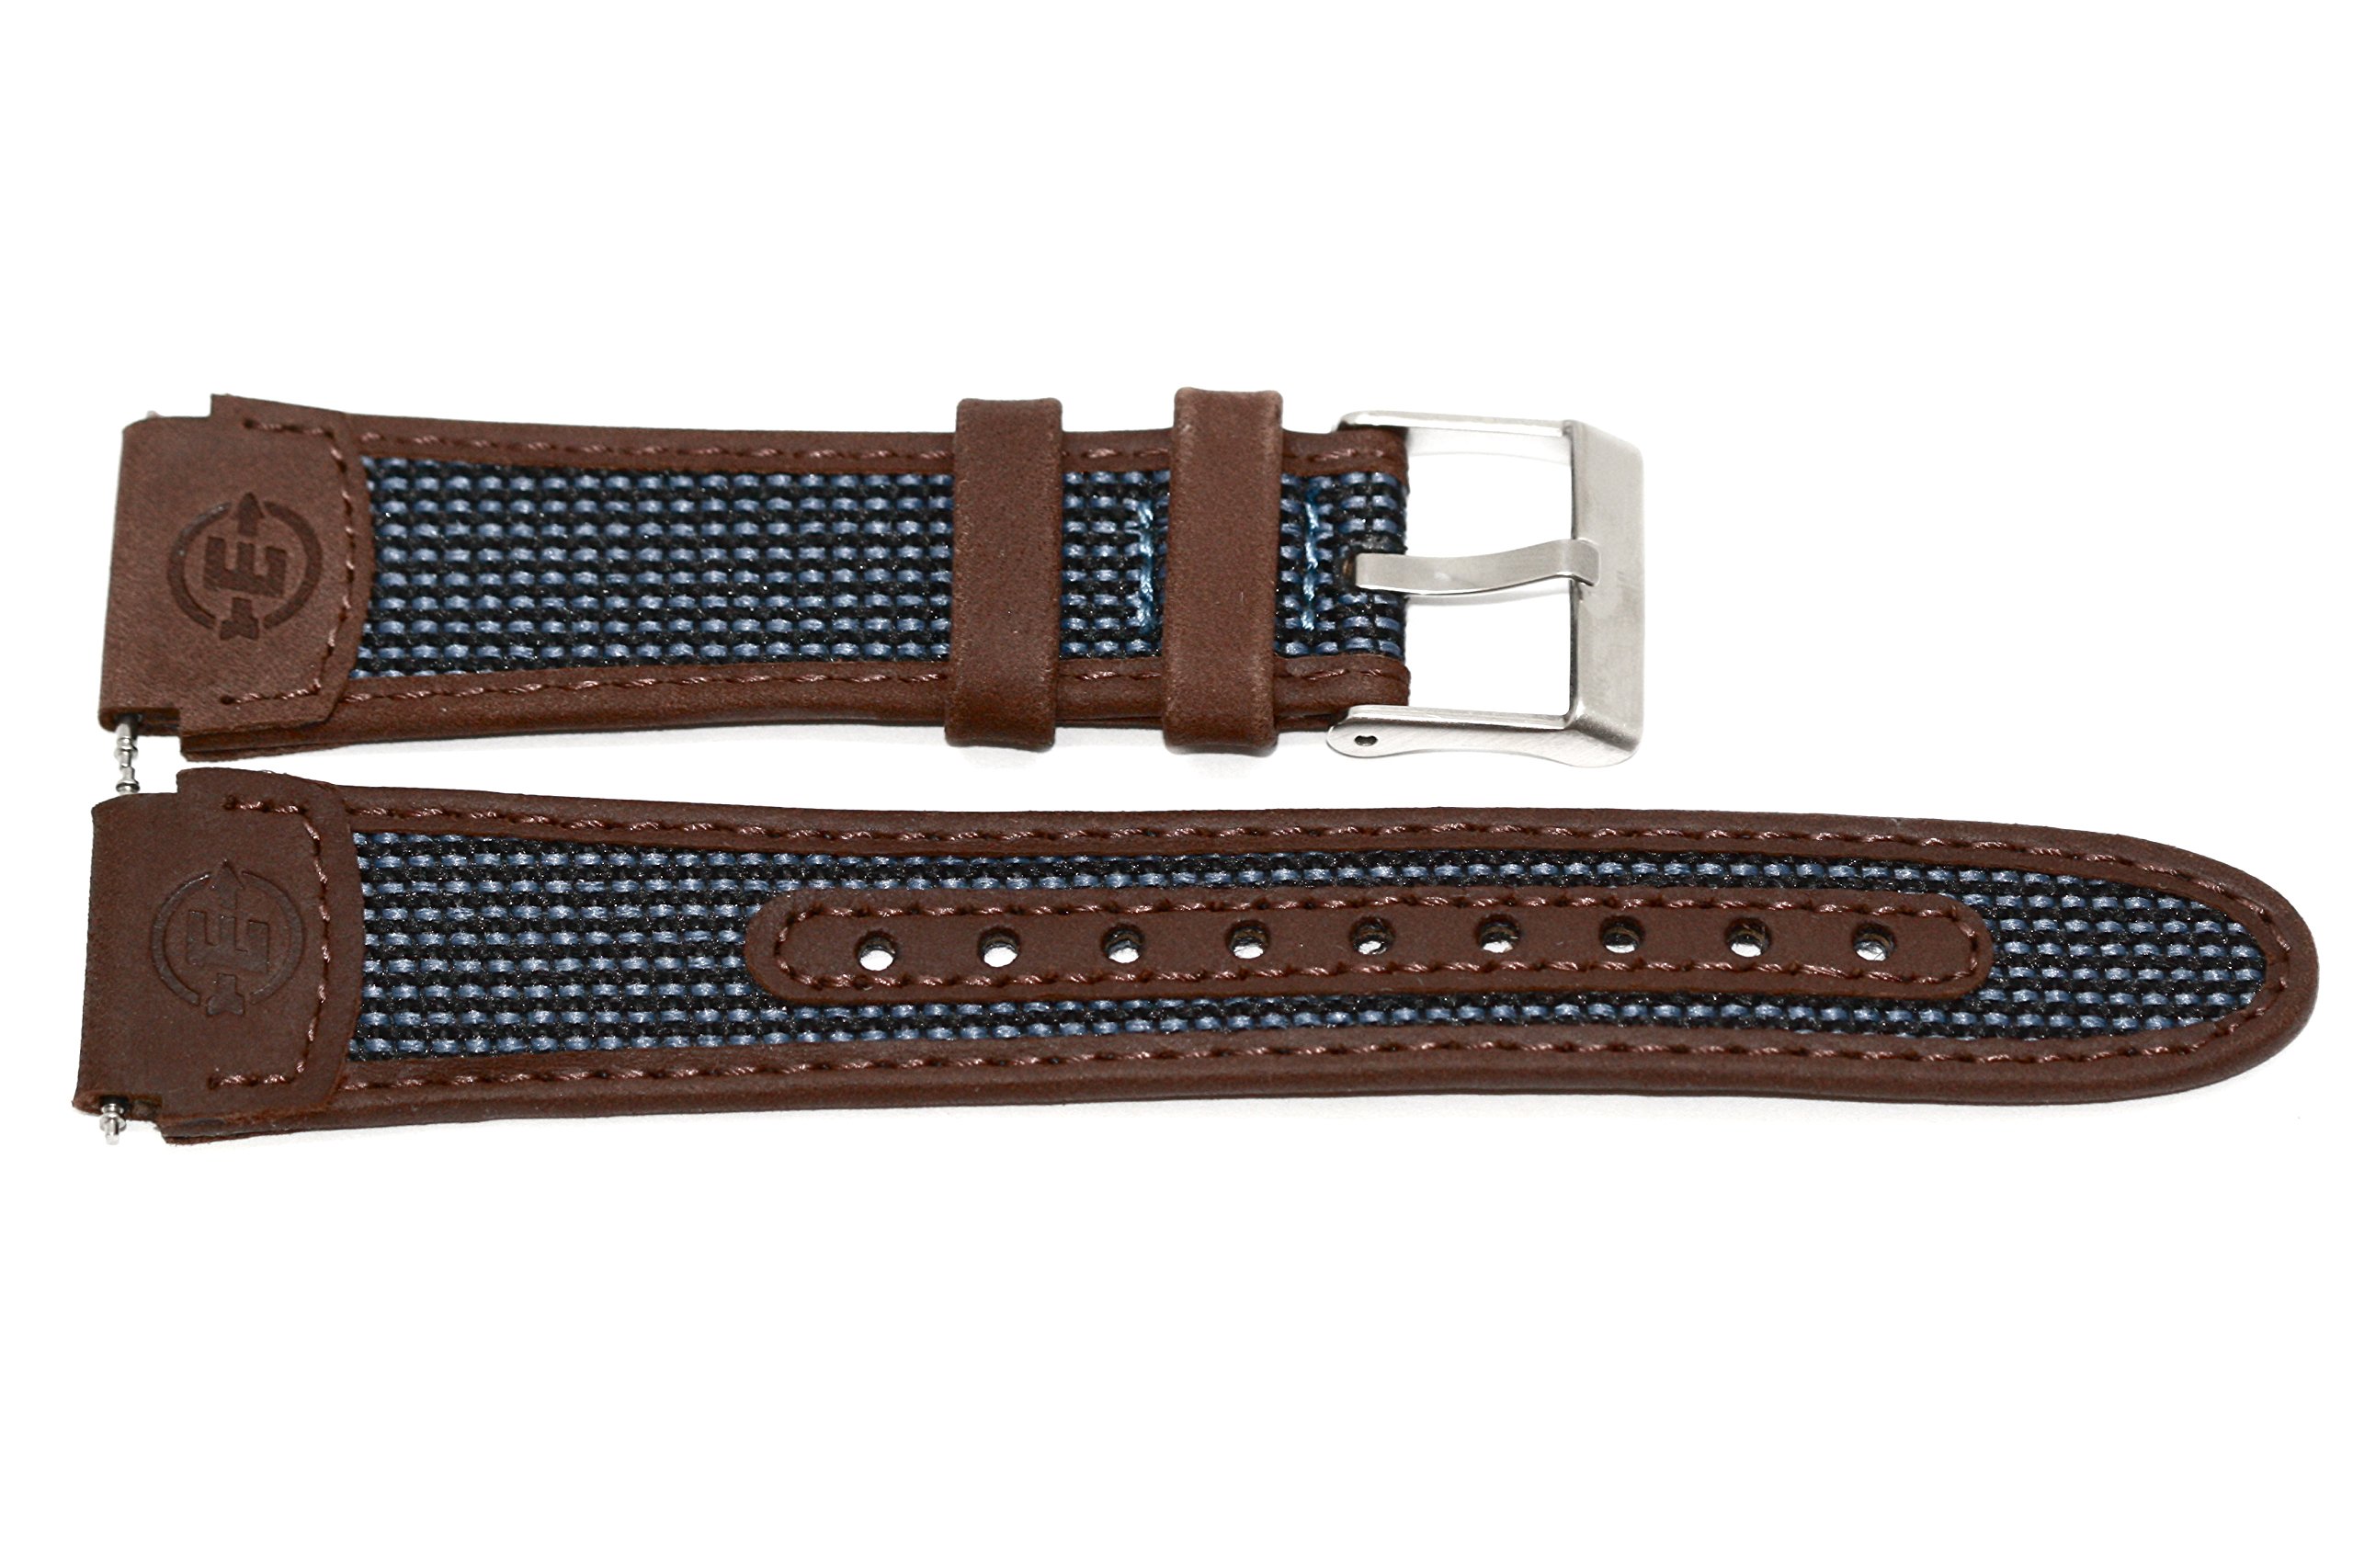 Timex Expedition 19mm Blue Brown Water Resistant Leather Chrono Timer Watch Band Strap